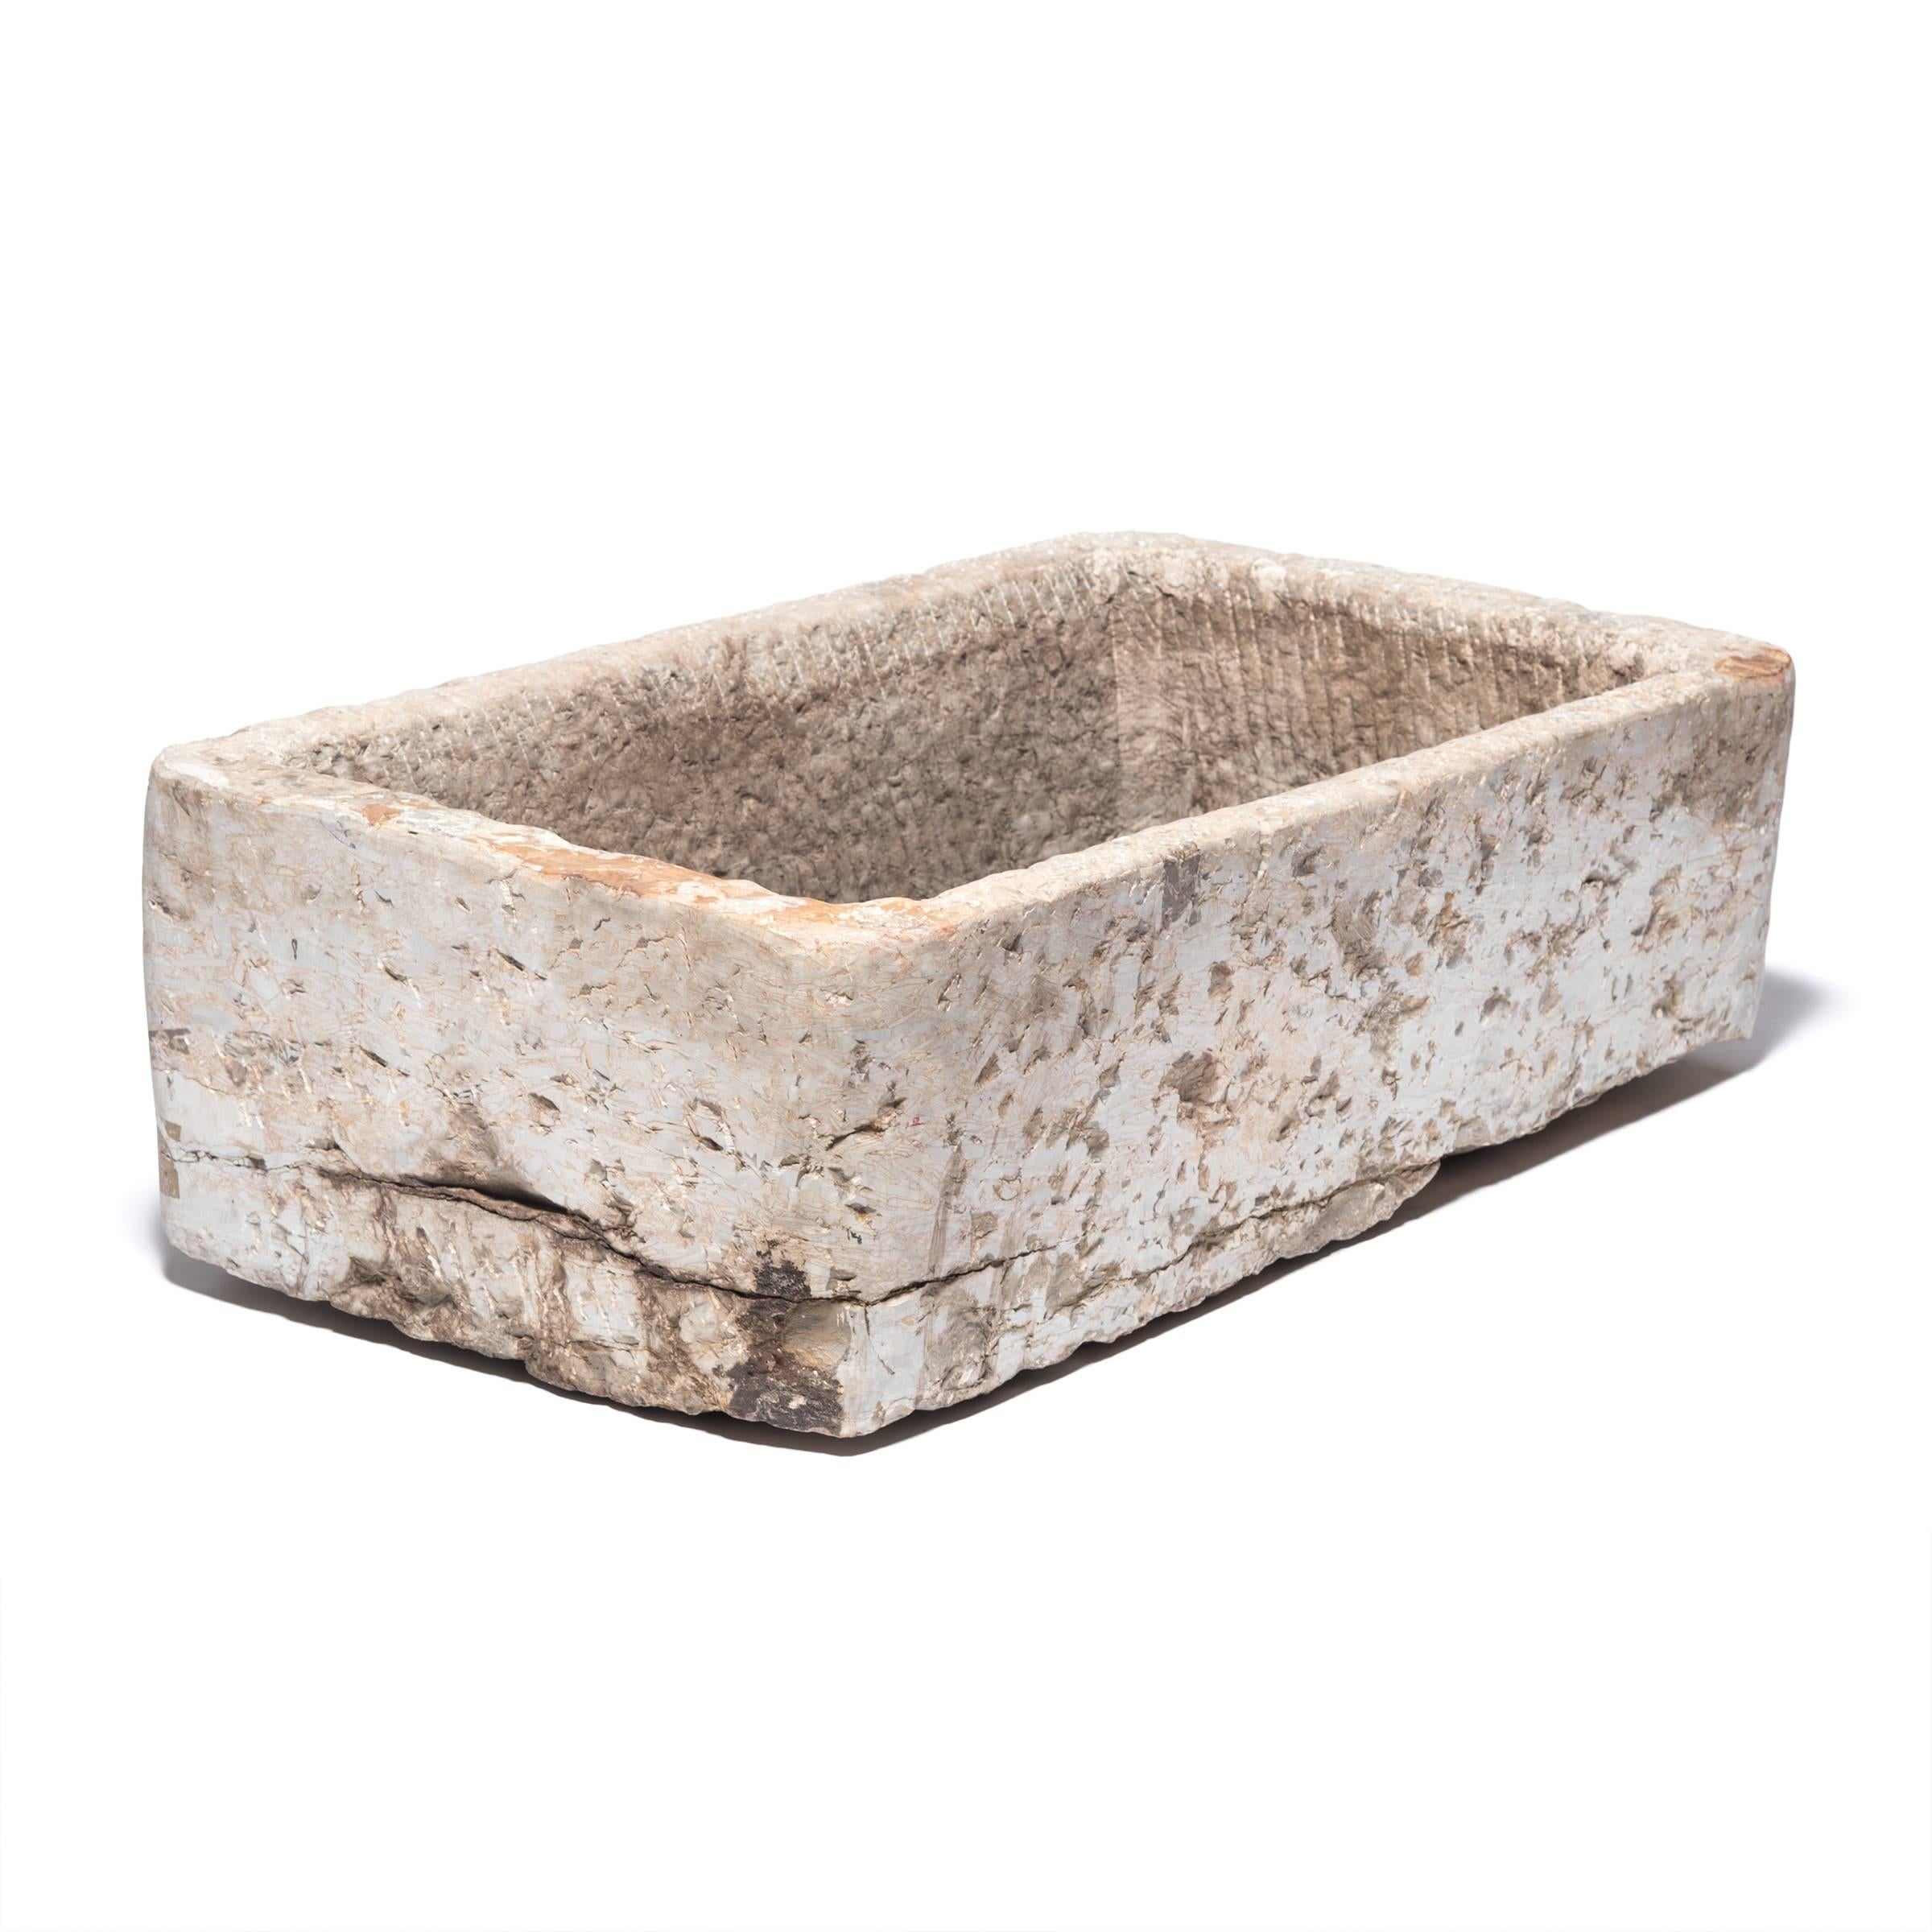 Hand-Carved Early 20th Century Chinese Stone Trough